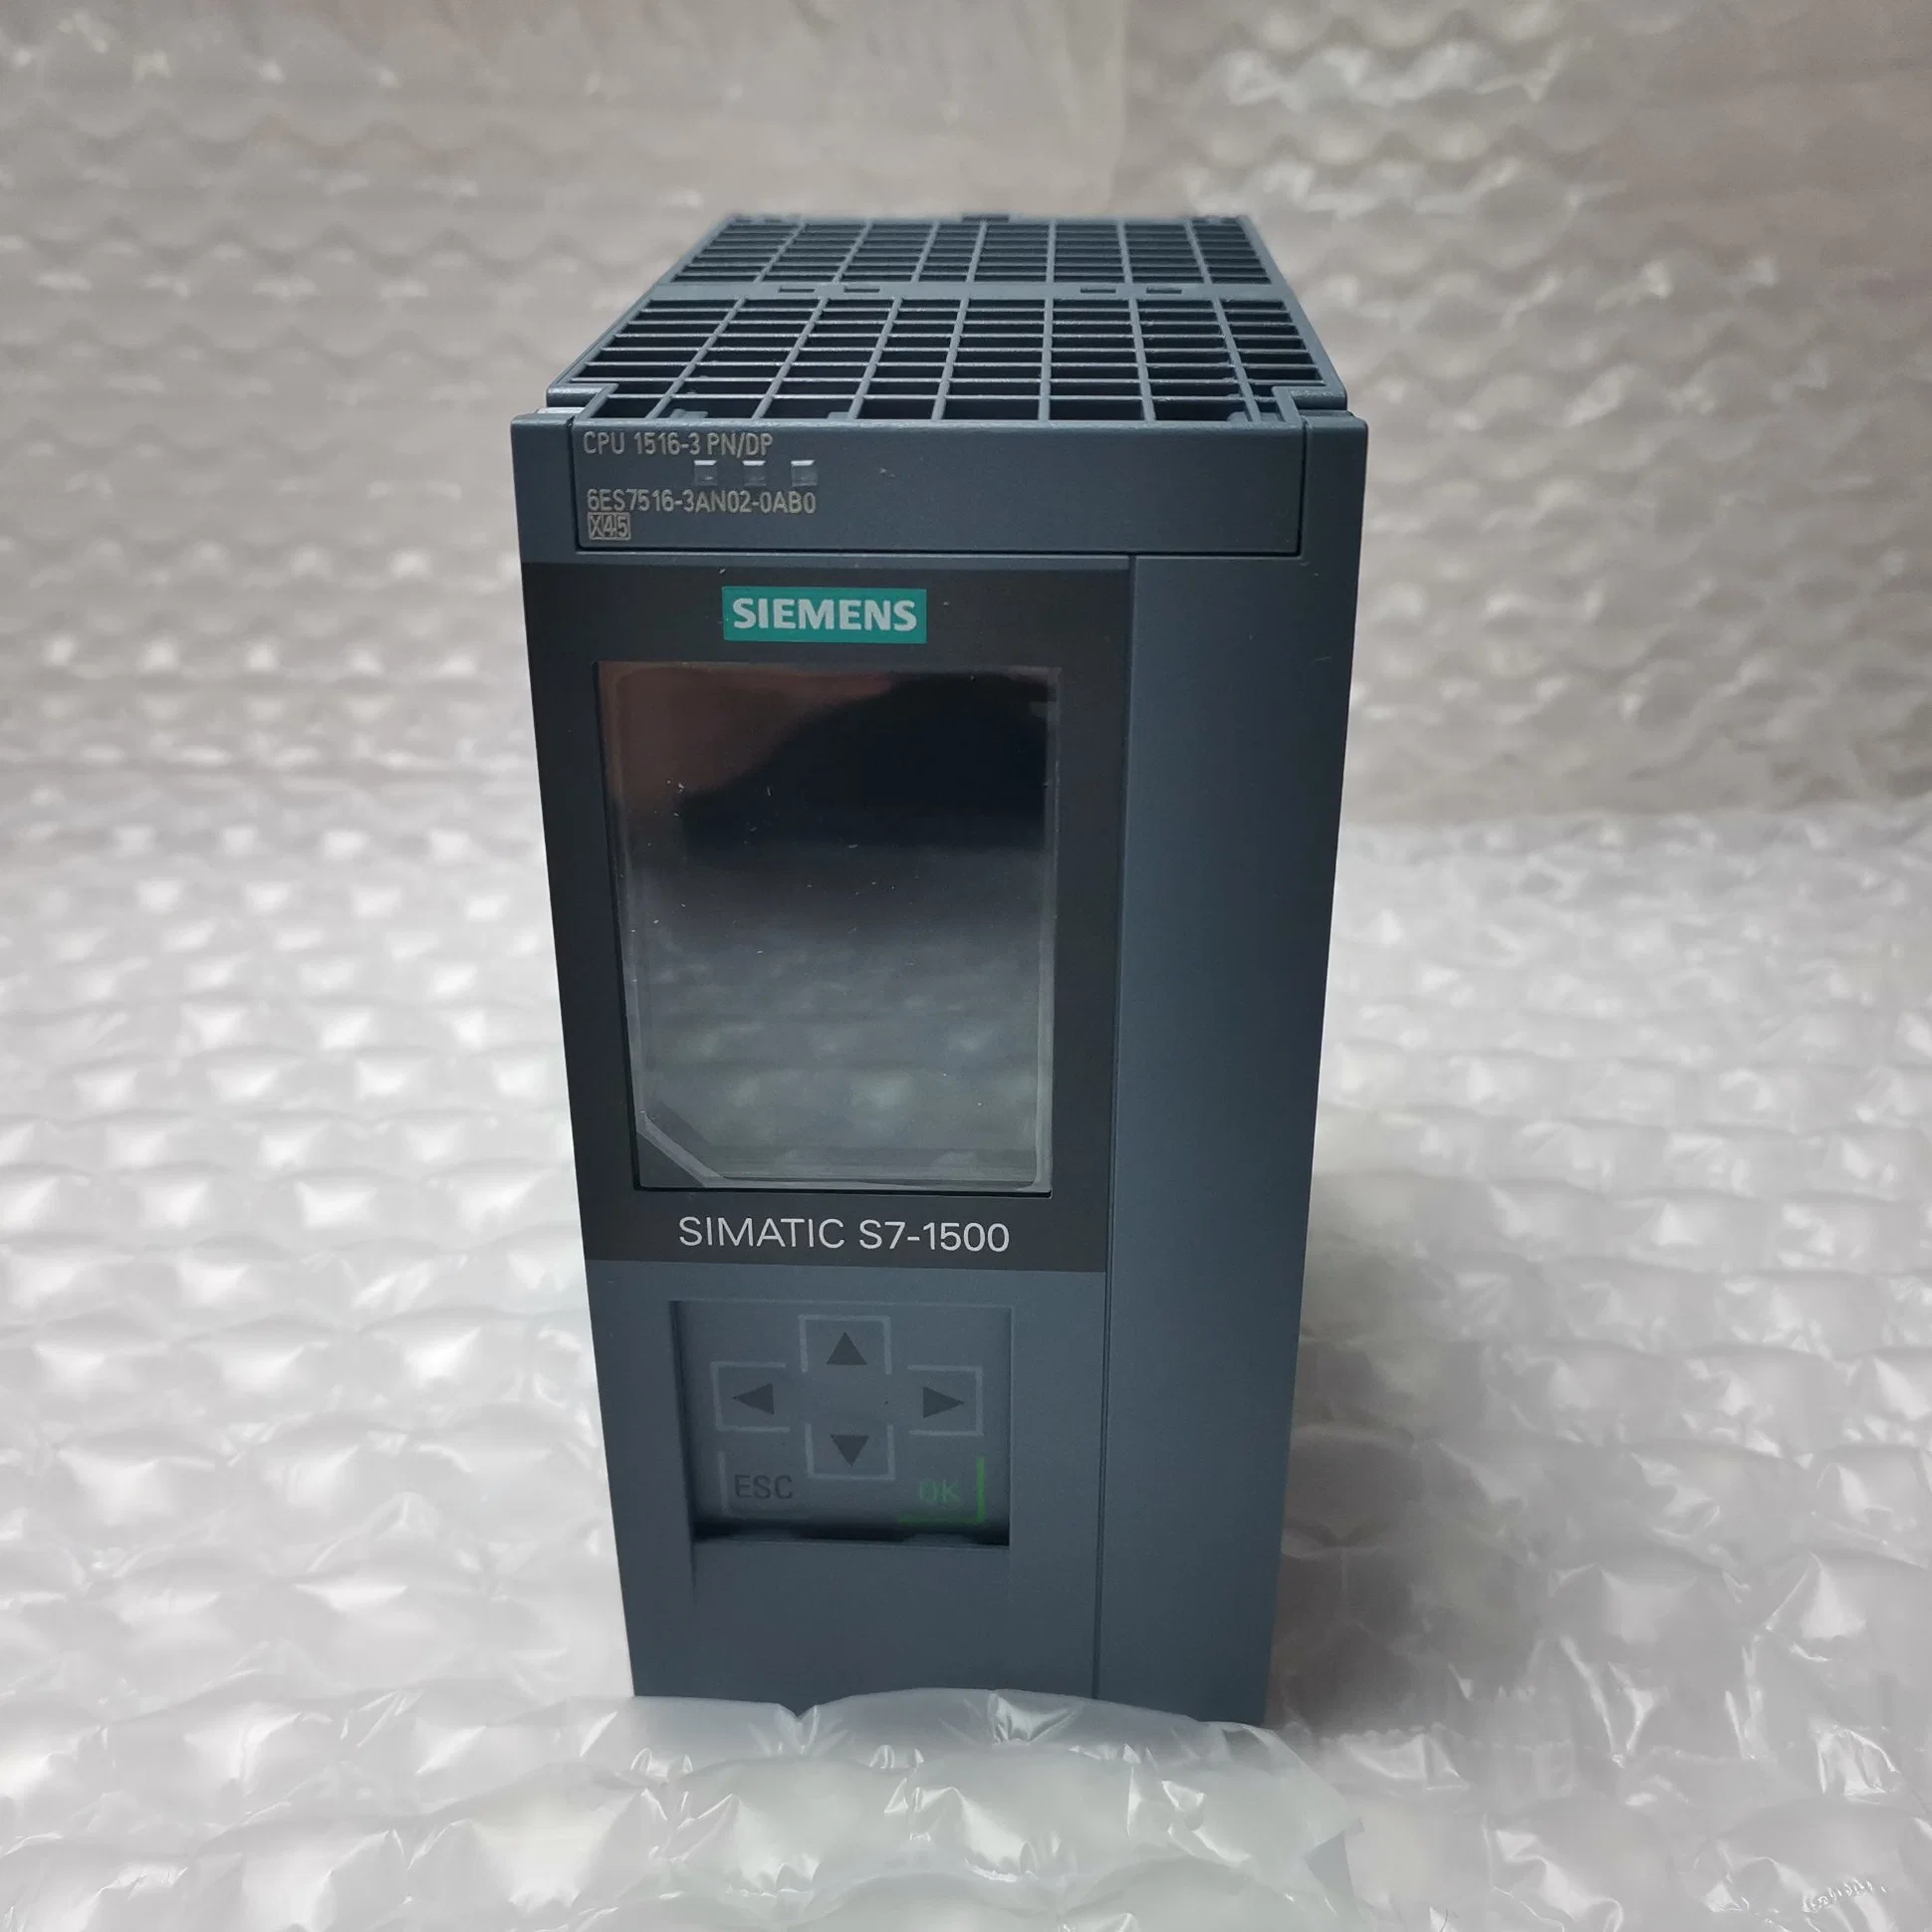 New 6es7516-3an02-0ab0 Siemens Automatic Simatic S7-1500 CPU 1516-3 Pn/Dp of PLC